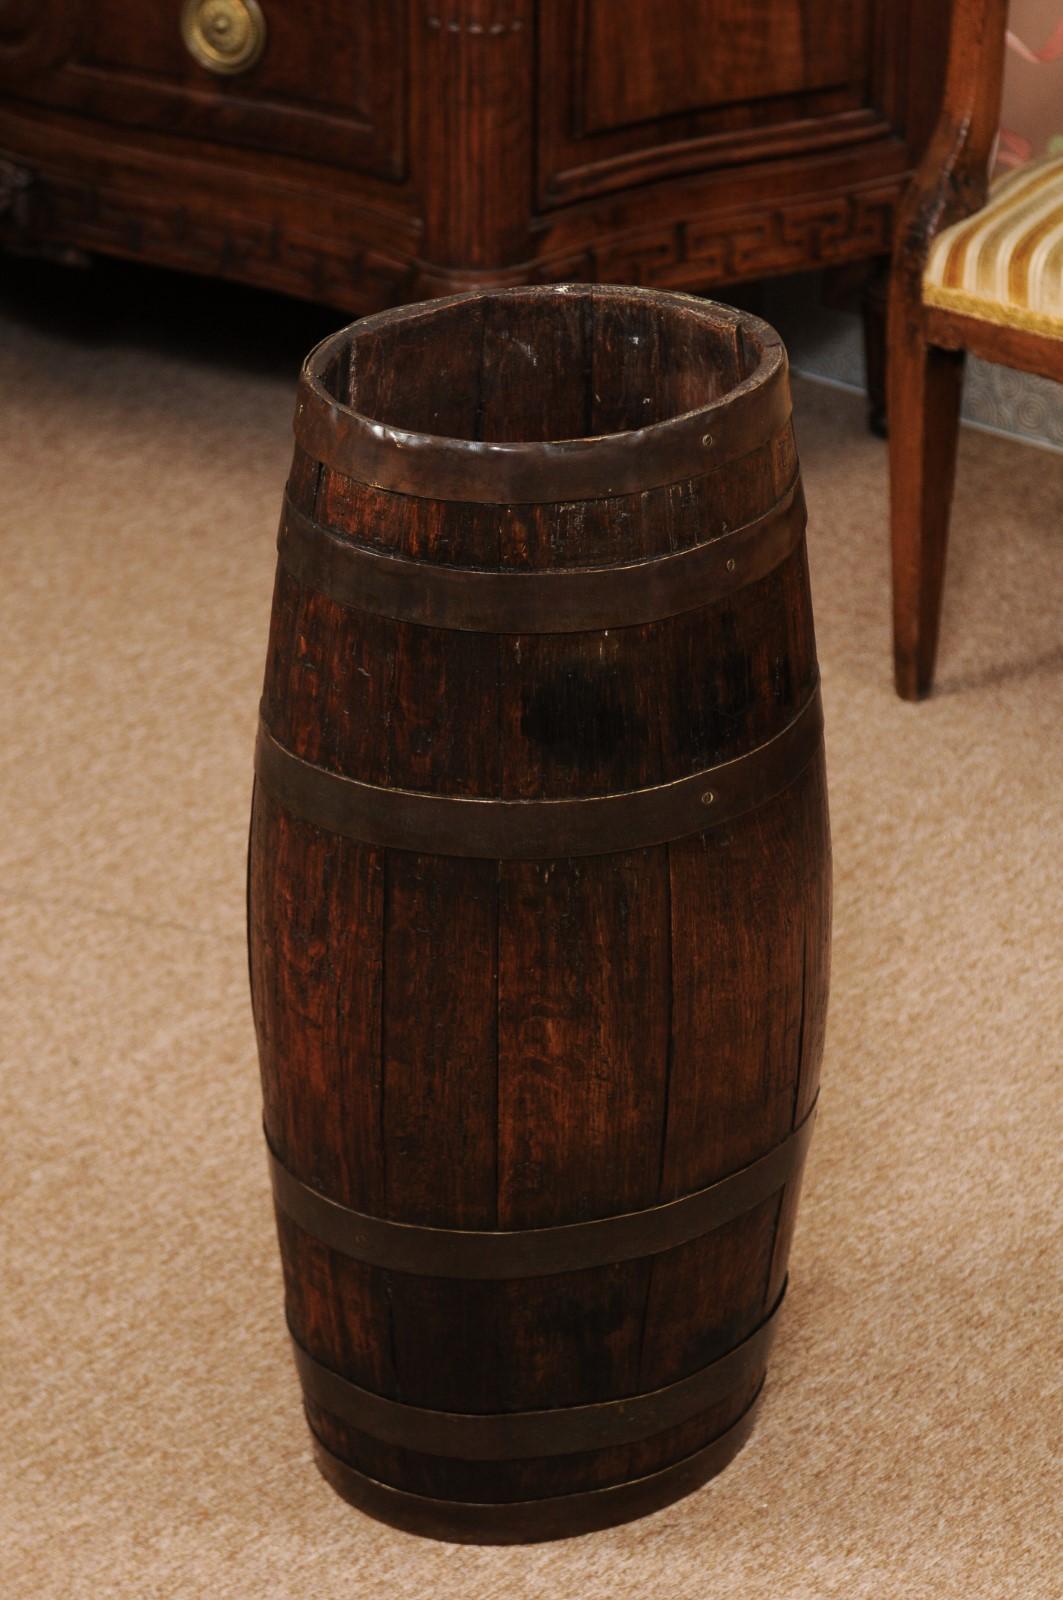 The late 19th century English oak barrell with brass banding.